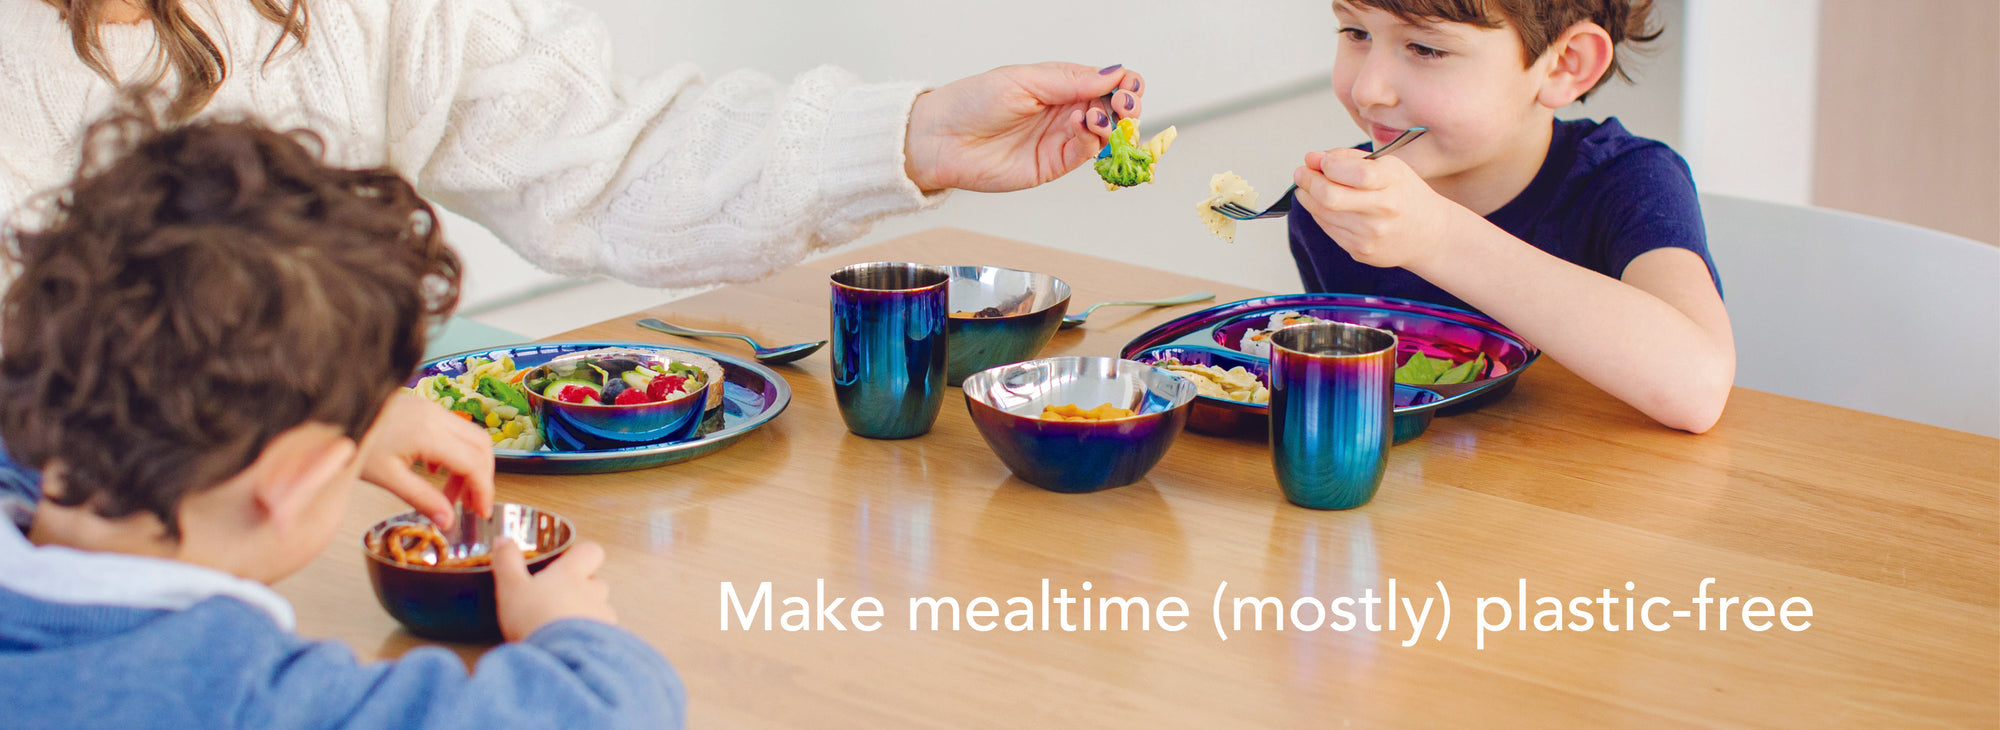 Make mealtime (mostly) plastic-free with our new ebook! Simple ways to use less plastic during your daily food routine. In a world filled with plastic, you can’t get totally rid of it. But you can use less. And we’re here to help you do that.